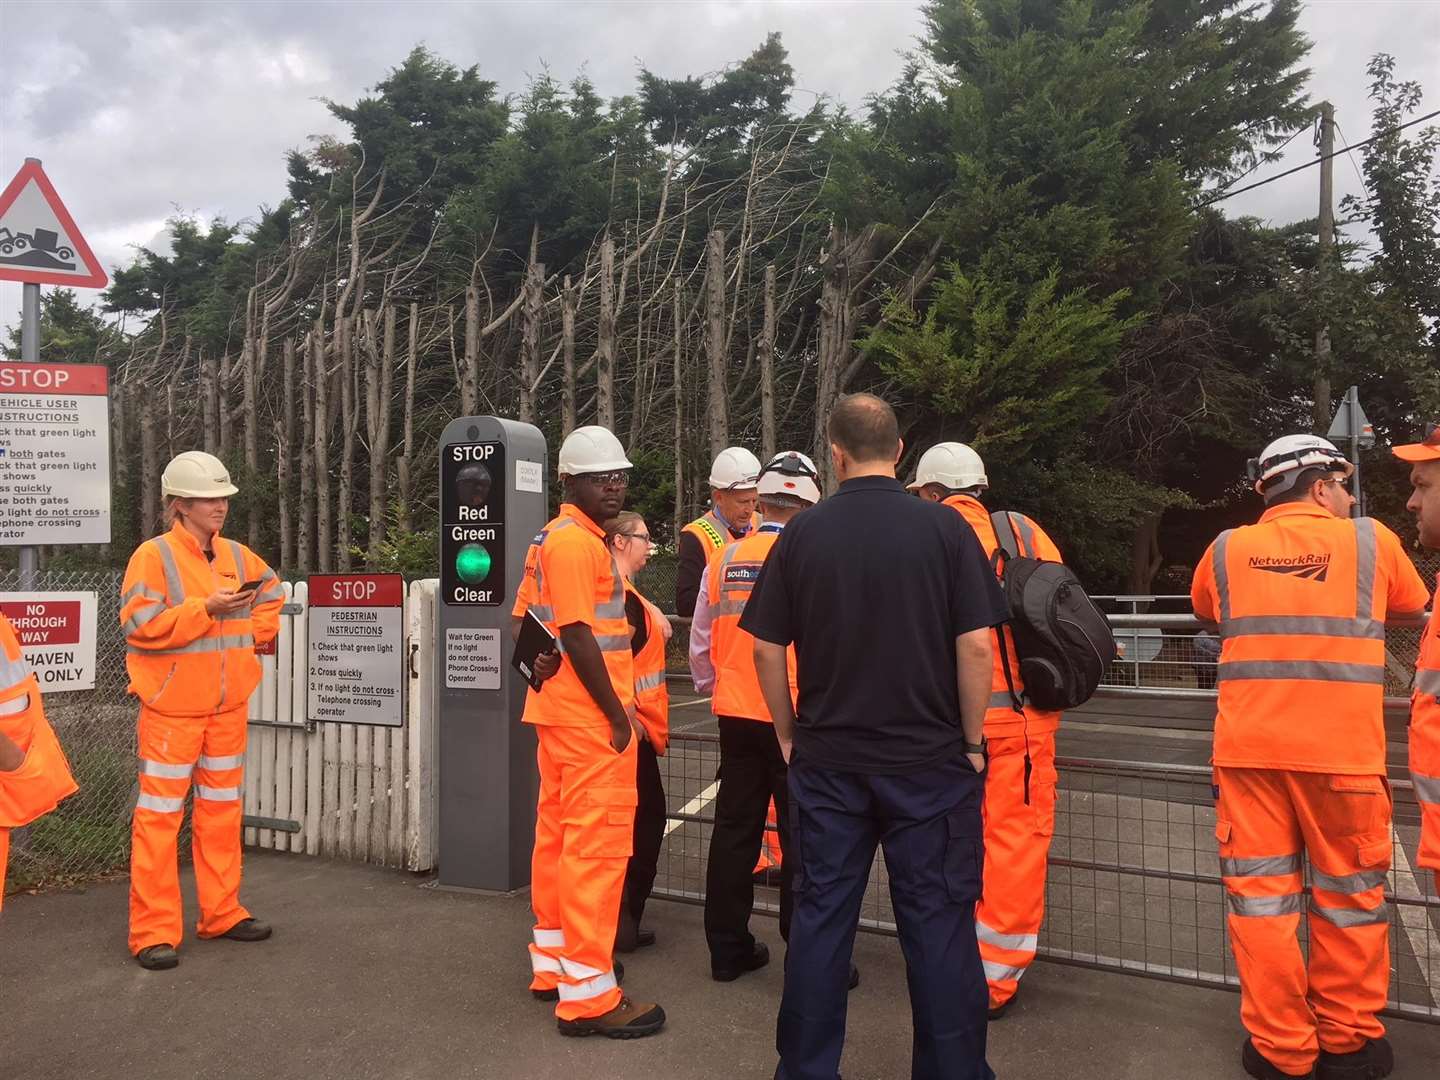 Network Rail engineers at the crossing in Halling